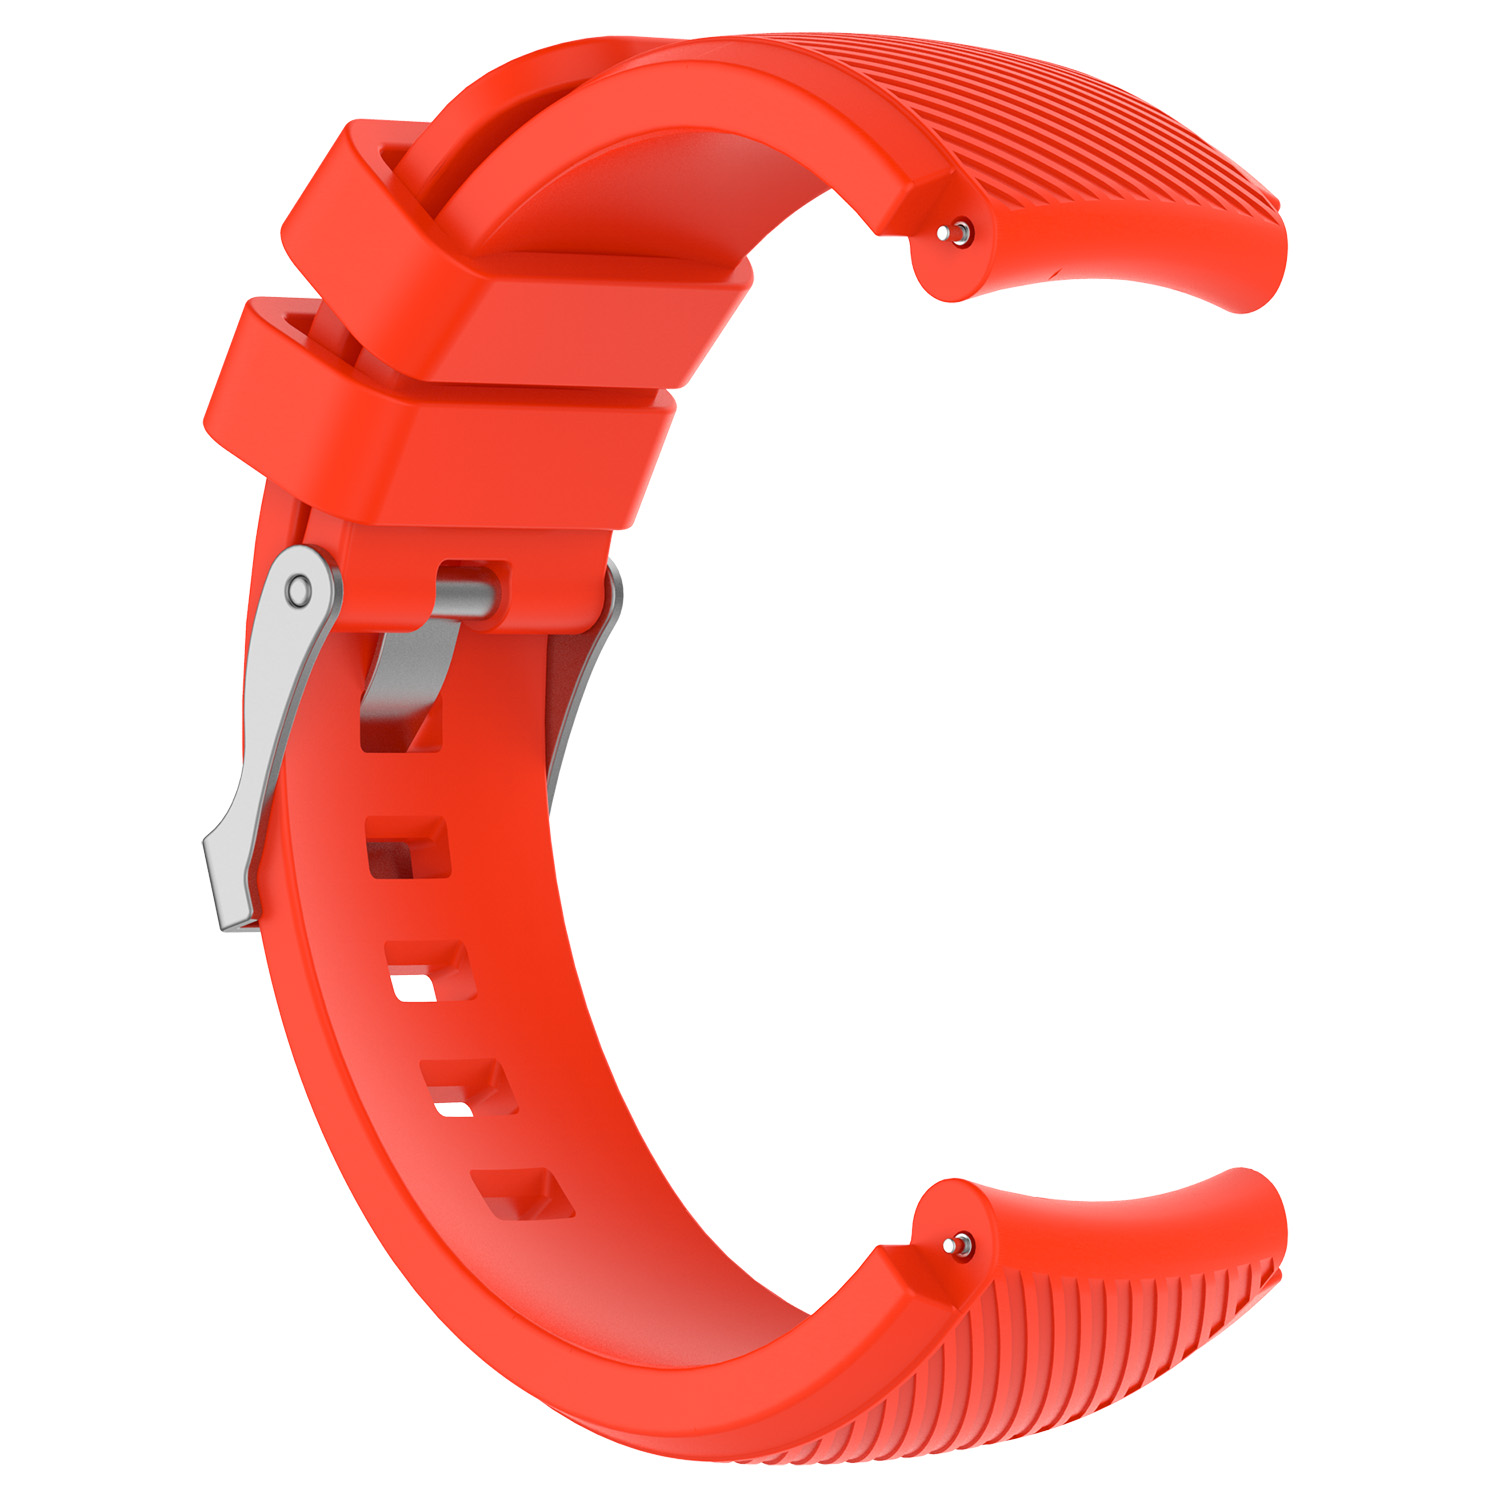 Bakeey-22mm-Universal-Watch-Band-Silicone-Watch-Strap-Replacement-for-HUAWEI-Watch-GT-1730954-12